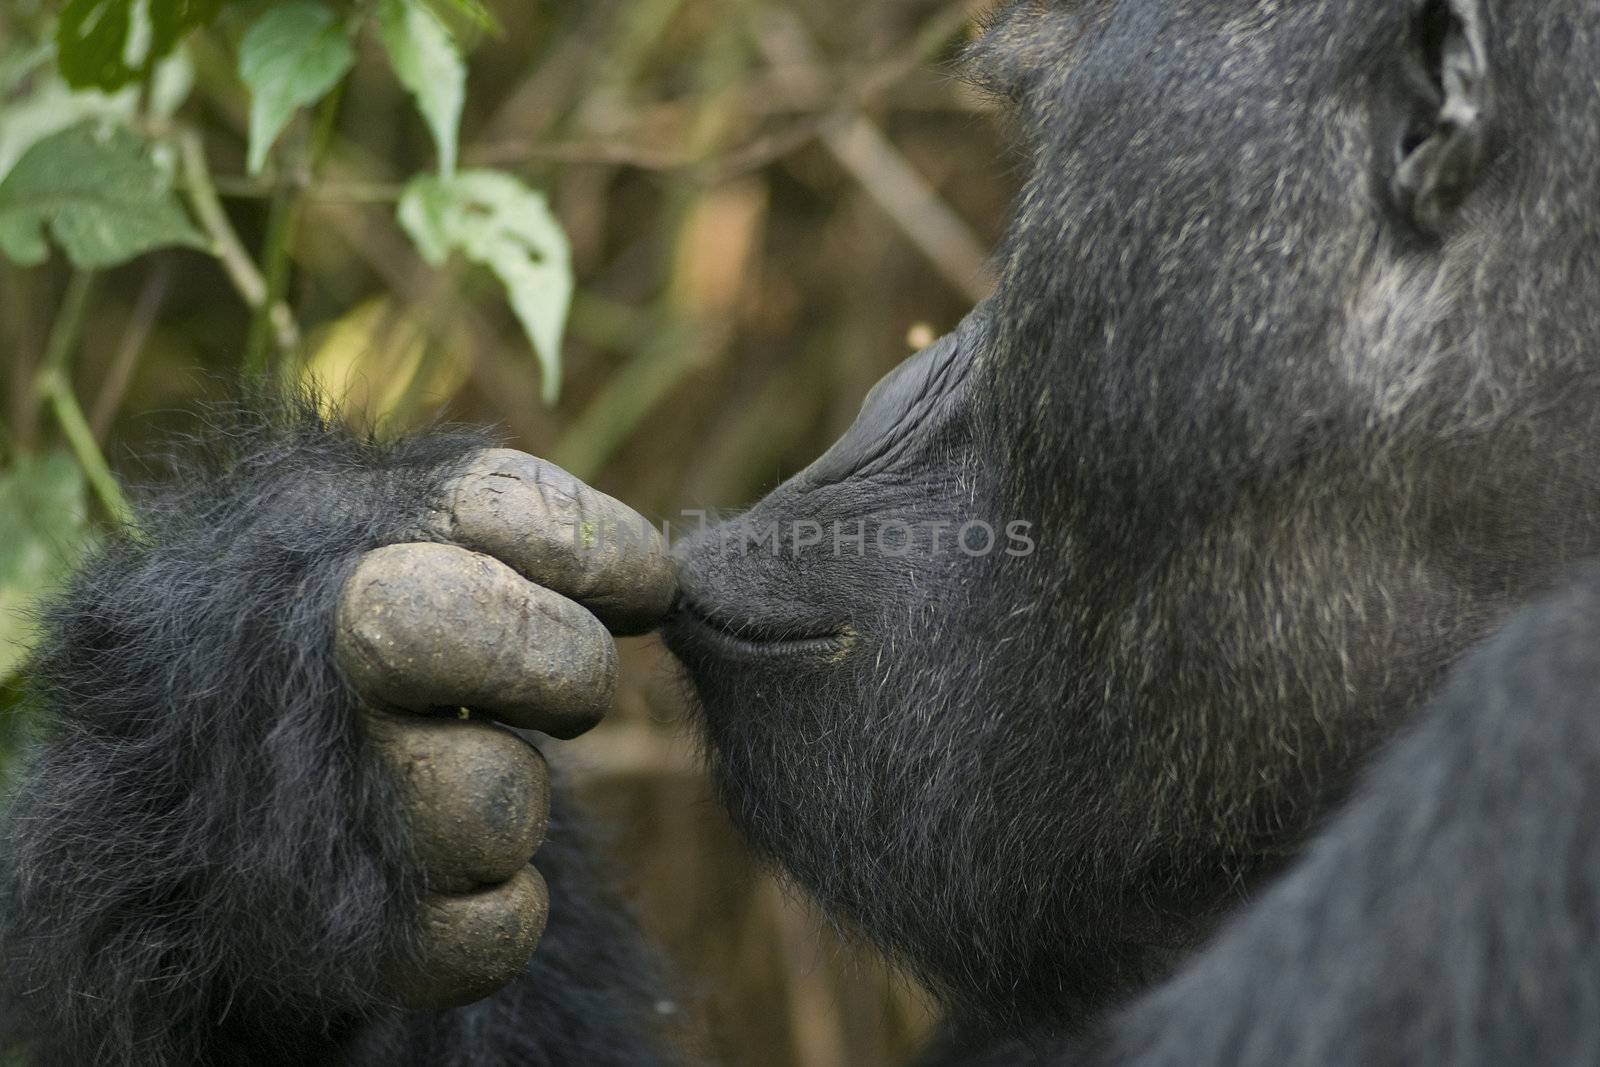 A closeup portrait of a silver back gorilla of the sub-species "Eastern Lowland Gorilla" (gorilla beringei graueri). Shot in wildlife (not a zoo-shot!) in Kahuzi Biega National Park in the Eastern part of the Democratic Republic of Congo, close to the boarder of Rwanda.

Note: focus on the lips

